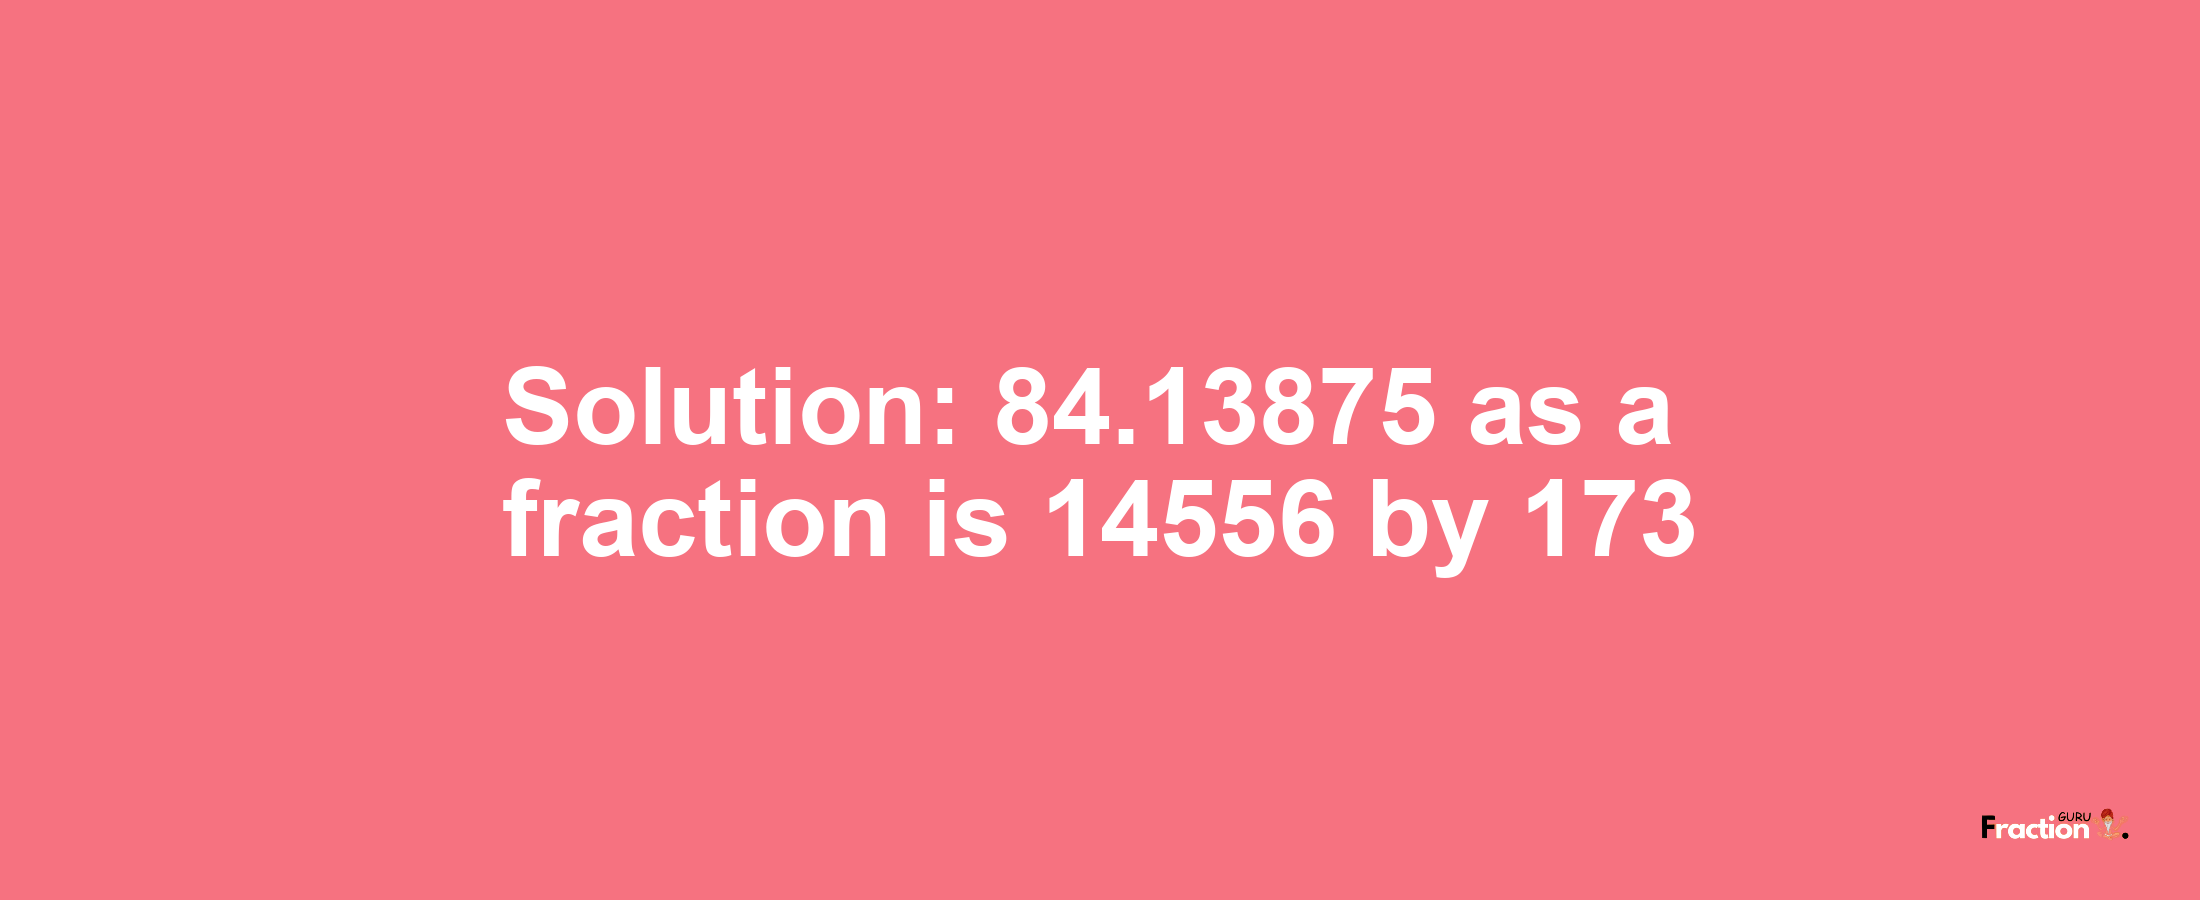 Solution:84.13875 as a fraction is 14556/173